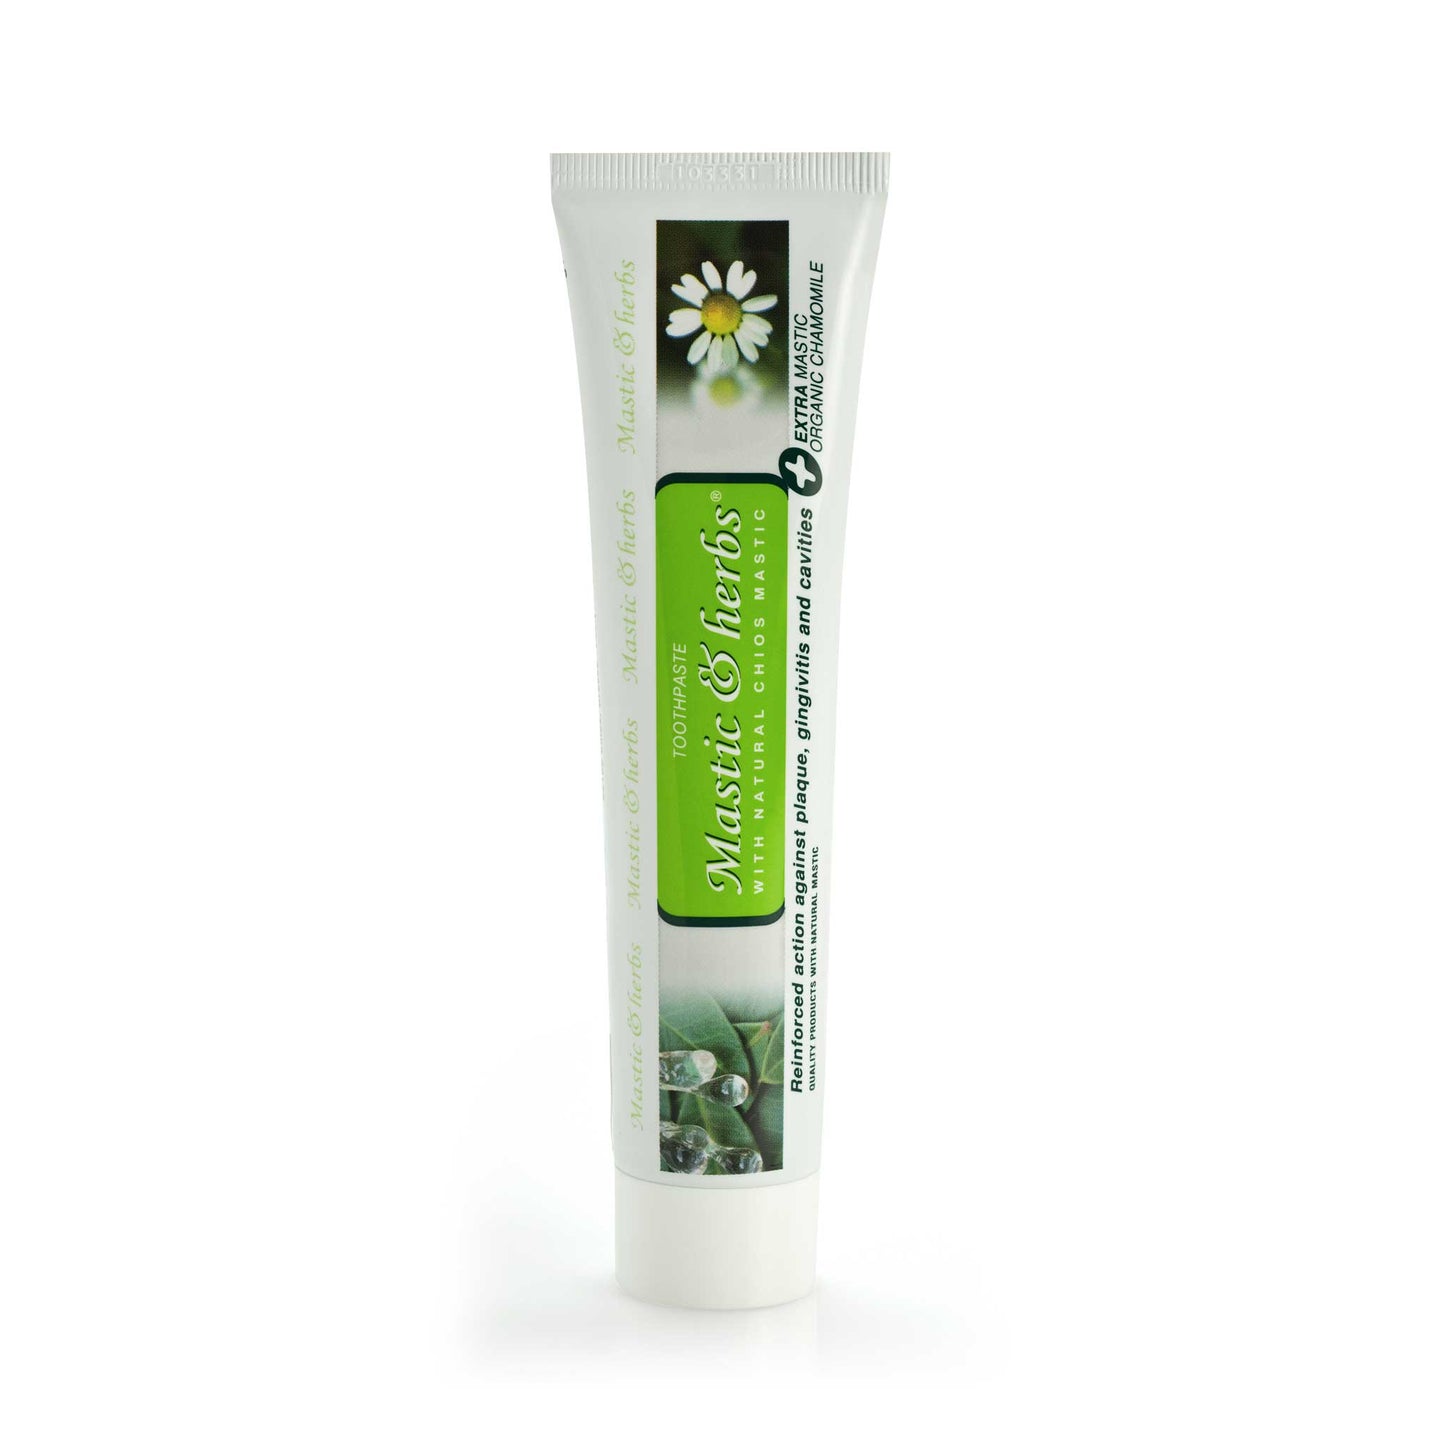 Toothpaste with Chios mastic oil and organic chamomile